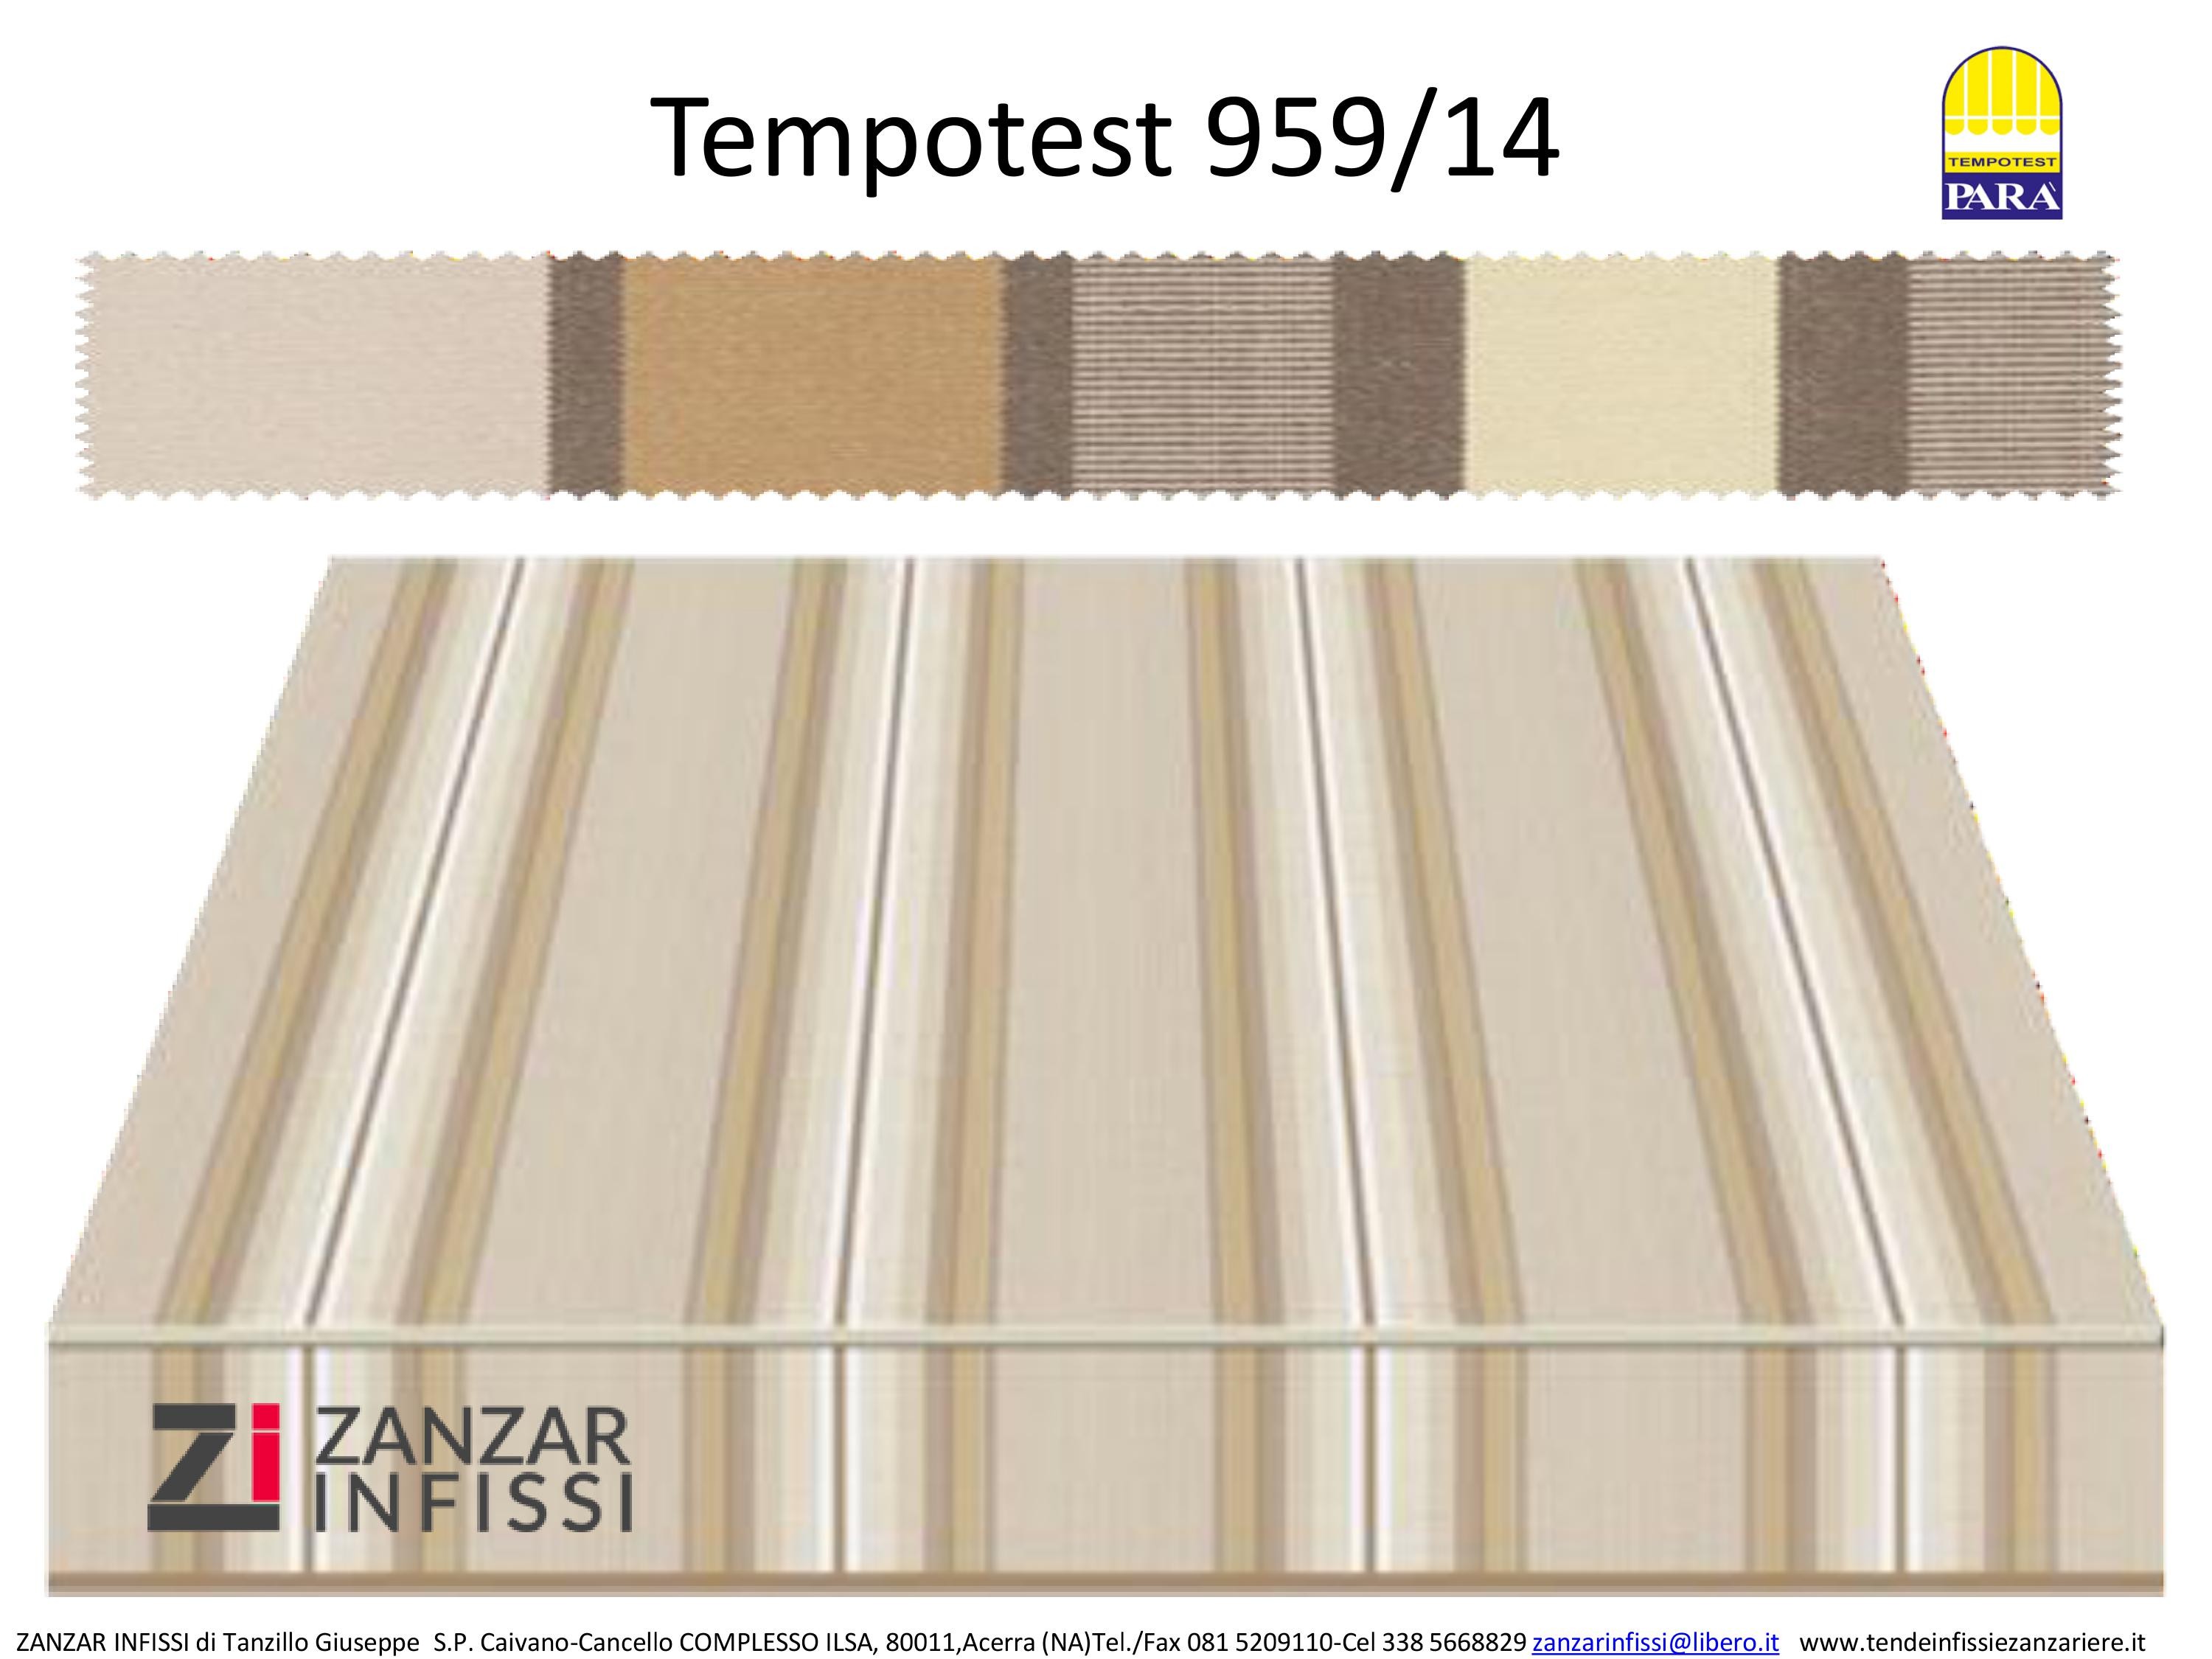 Tempotest 959/14